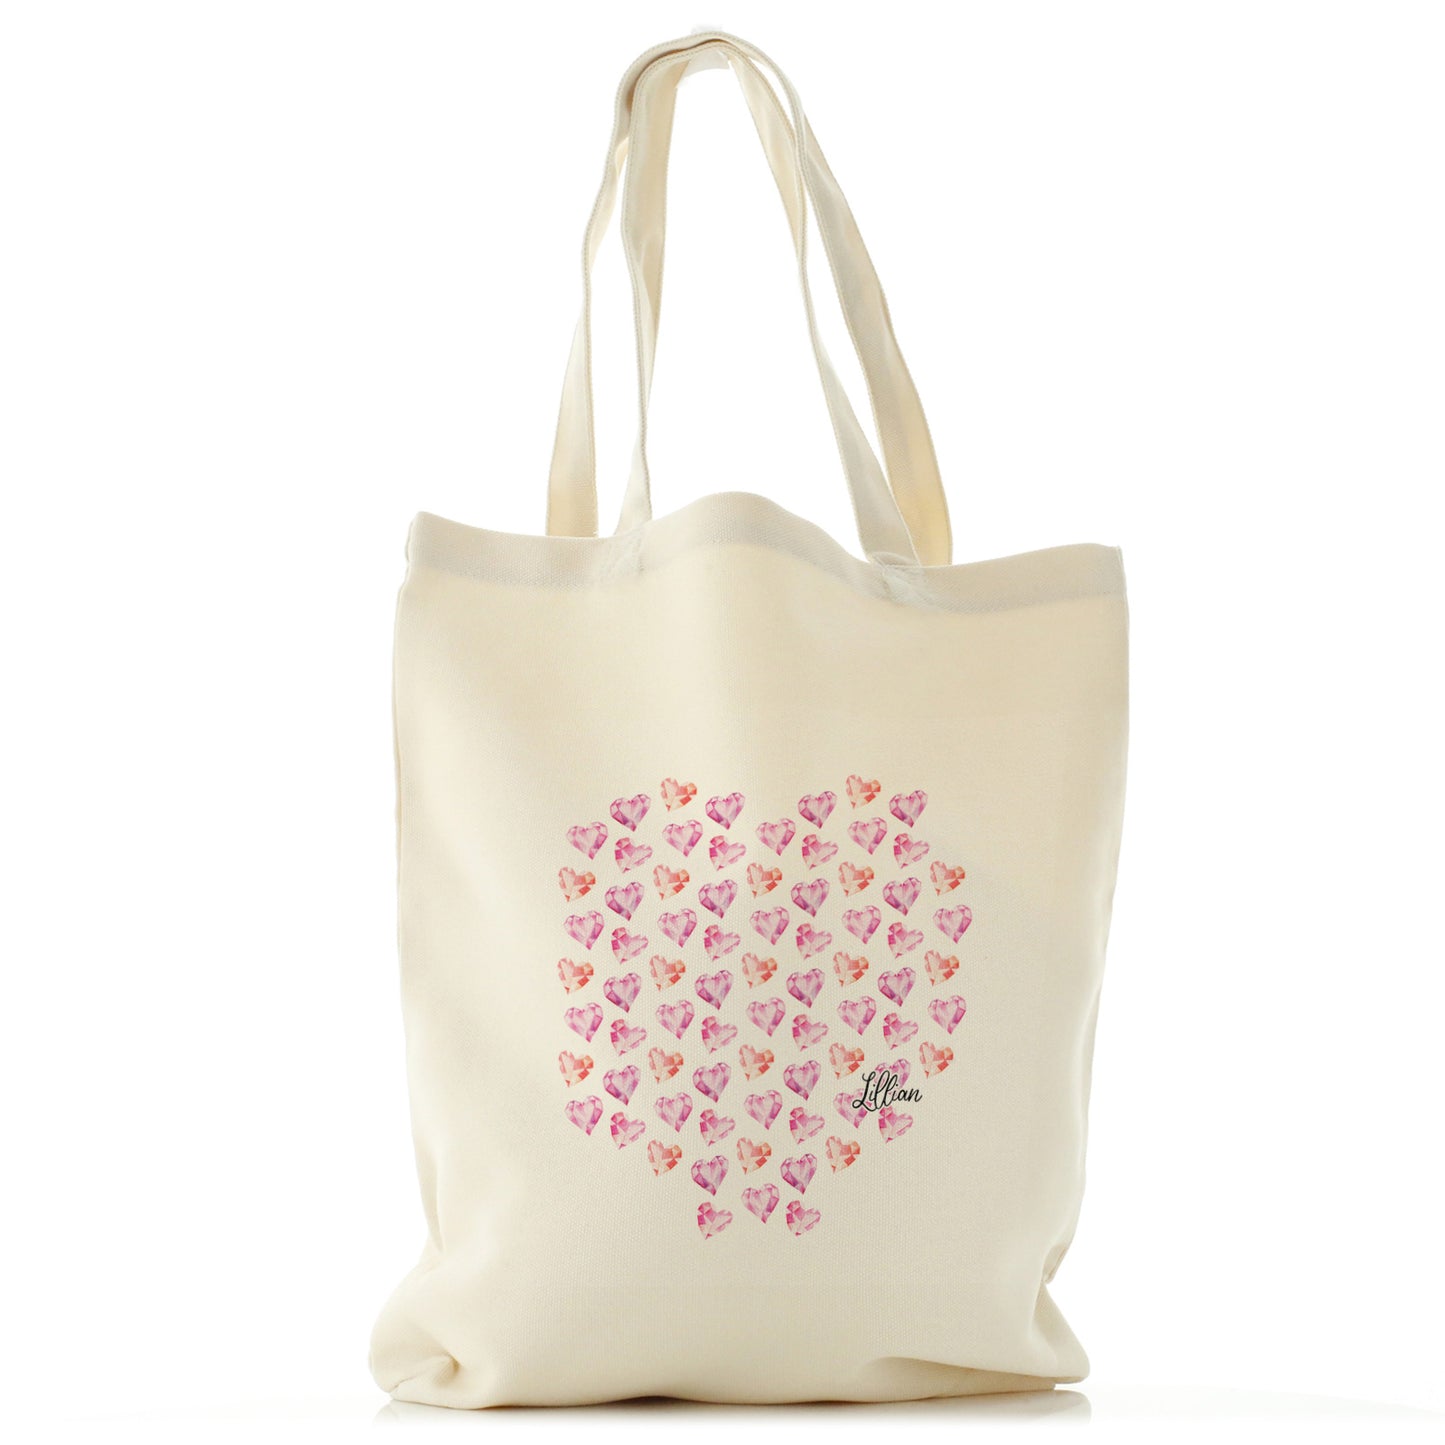 Personalised Canvas Tote Bag with Stylish Text and Crystal Hearts Print